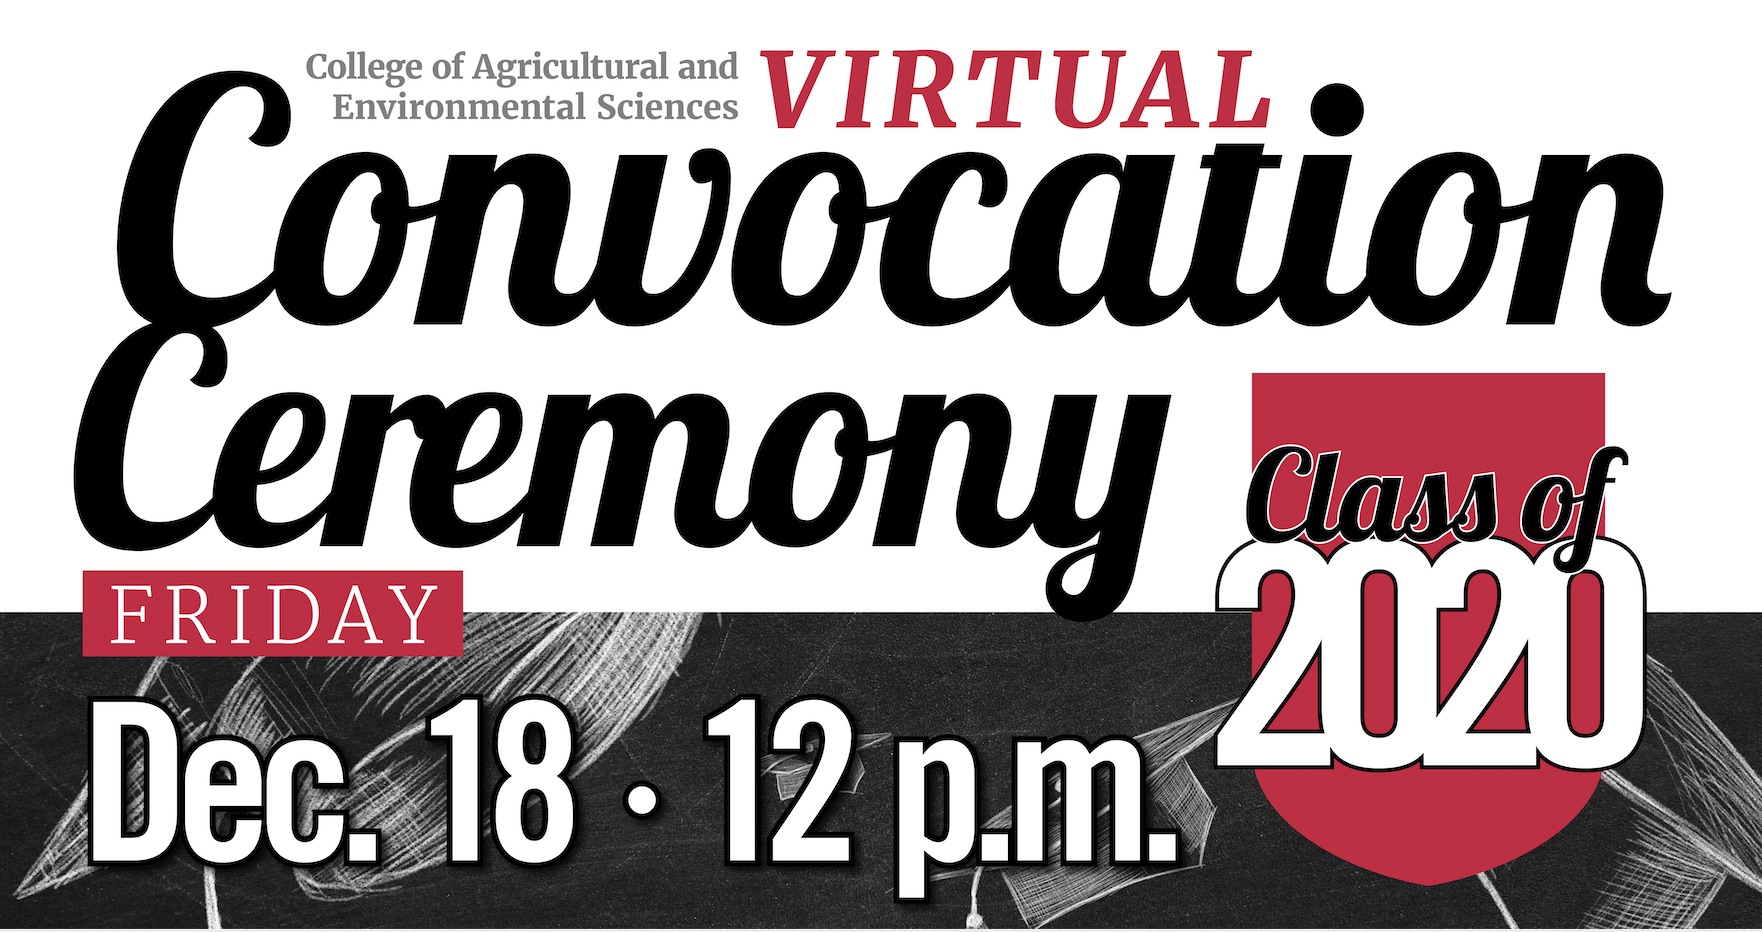 The UGA College of Agricultural and Environmental Sciences will hold a virtual convocation ceremony at noon on Friday, Dec. 18, to celebrate new graduates.